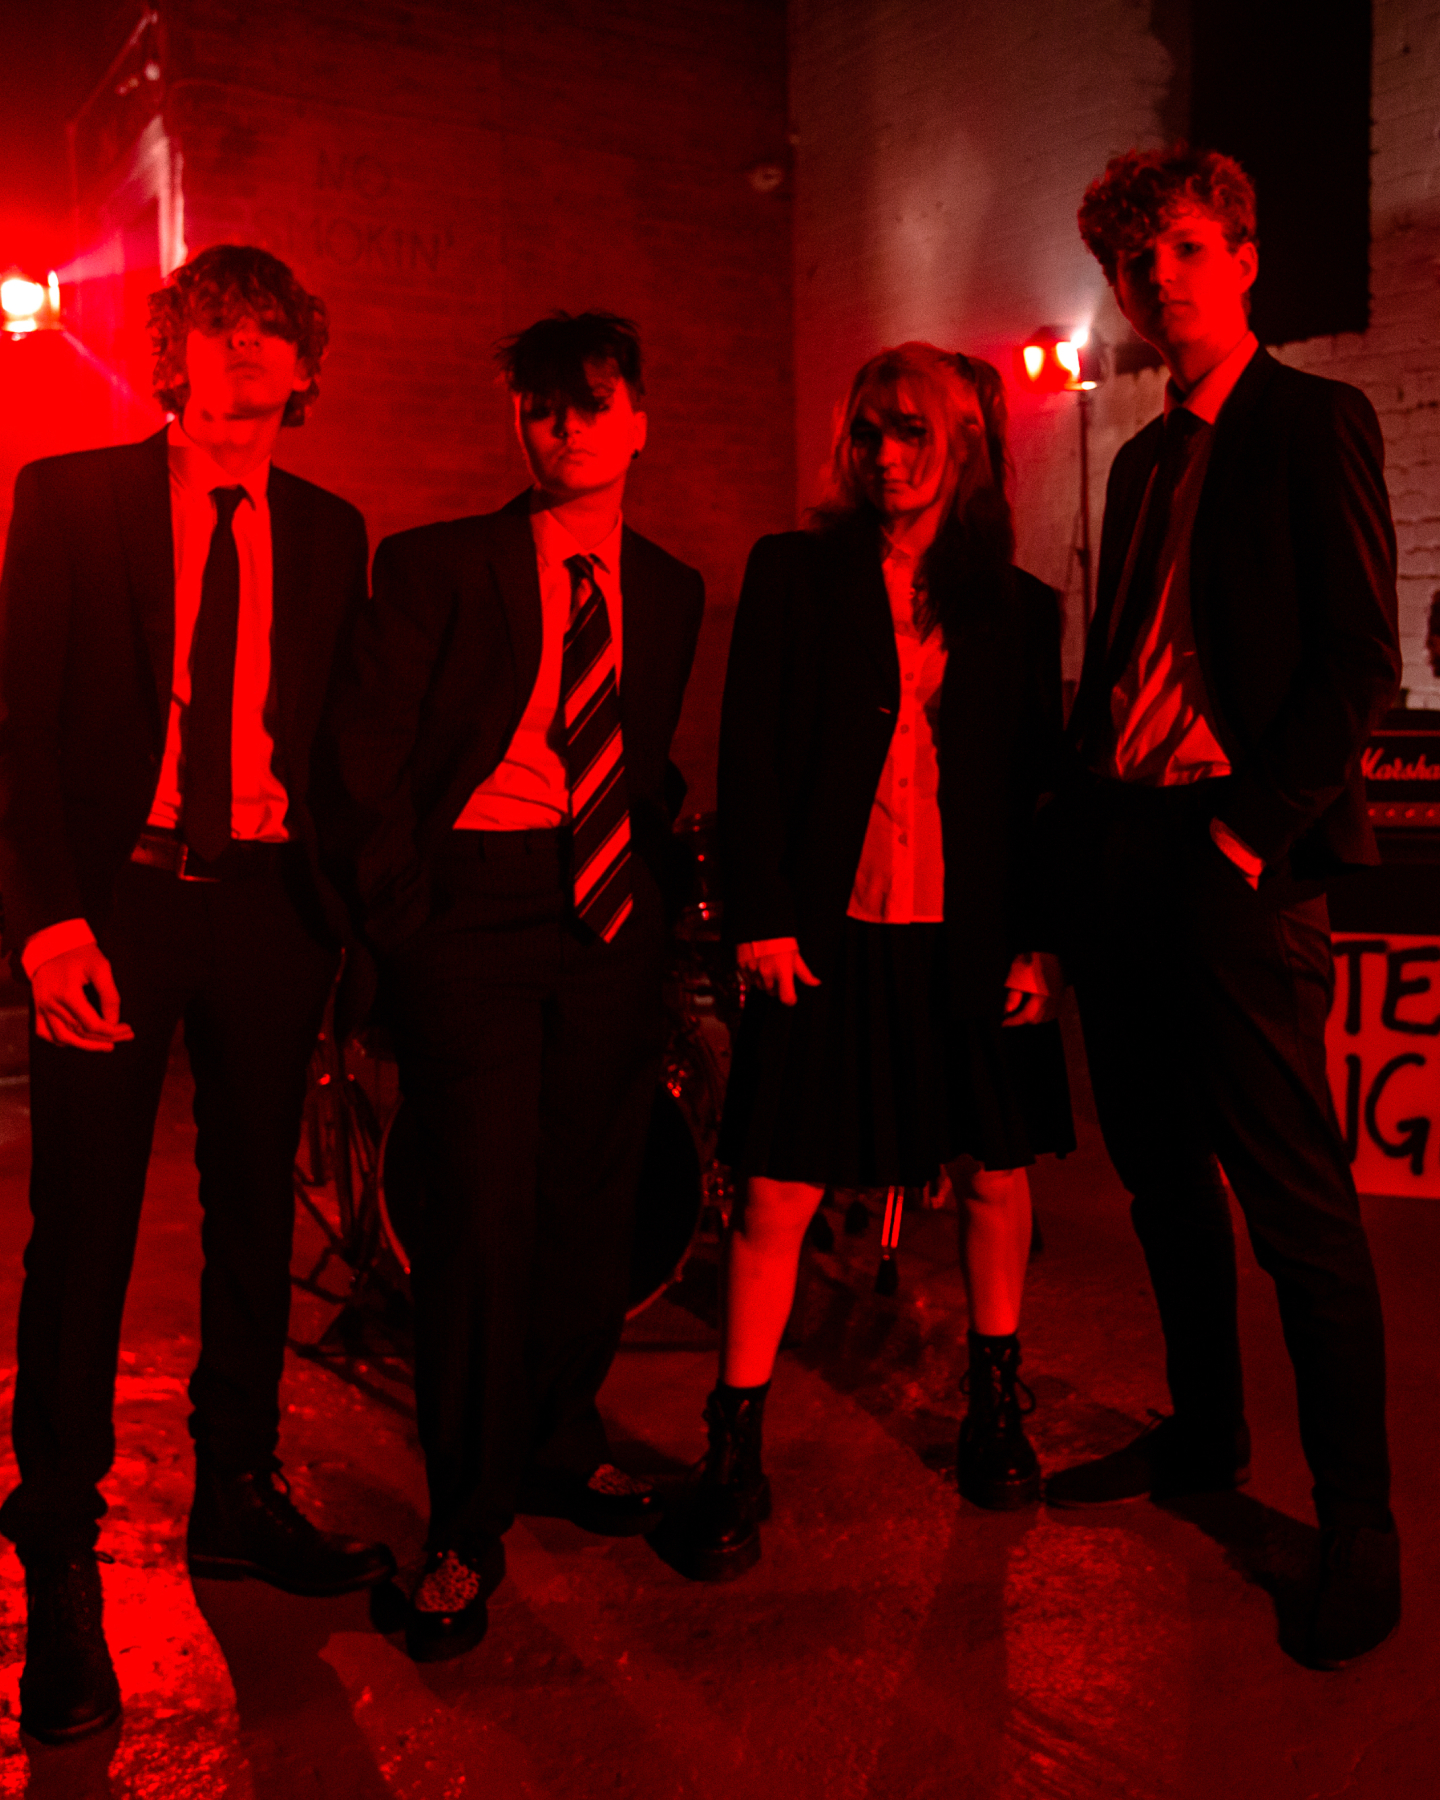 Band Noah and the loners stand in a dimly lit red room, dressed in formal attire. There is a drum set in the background.